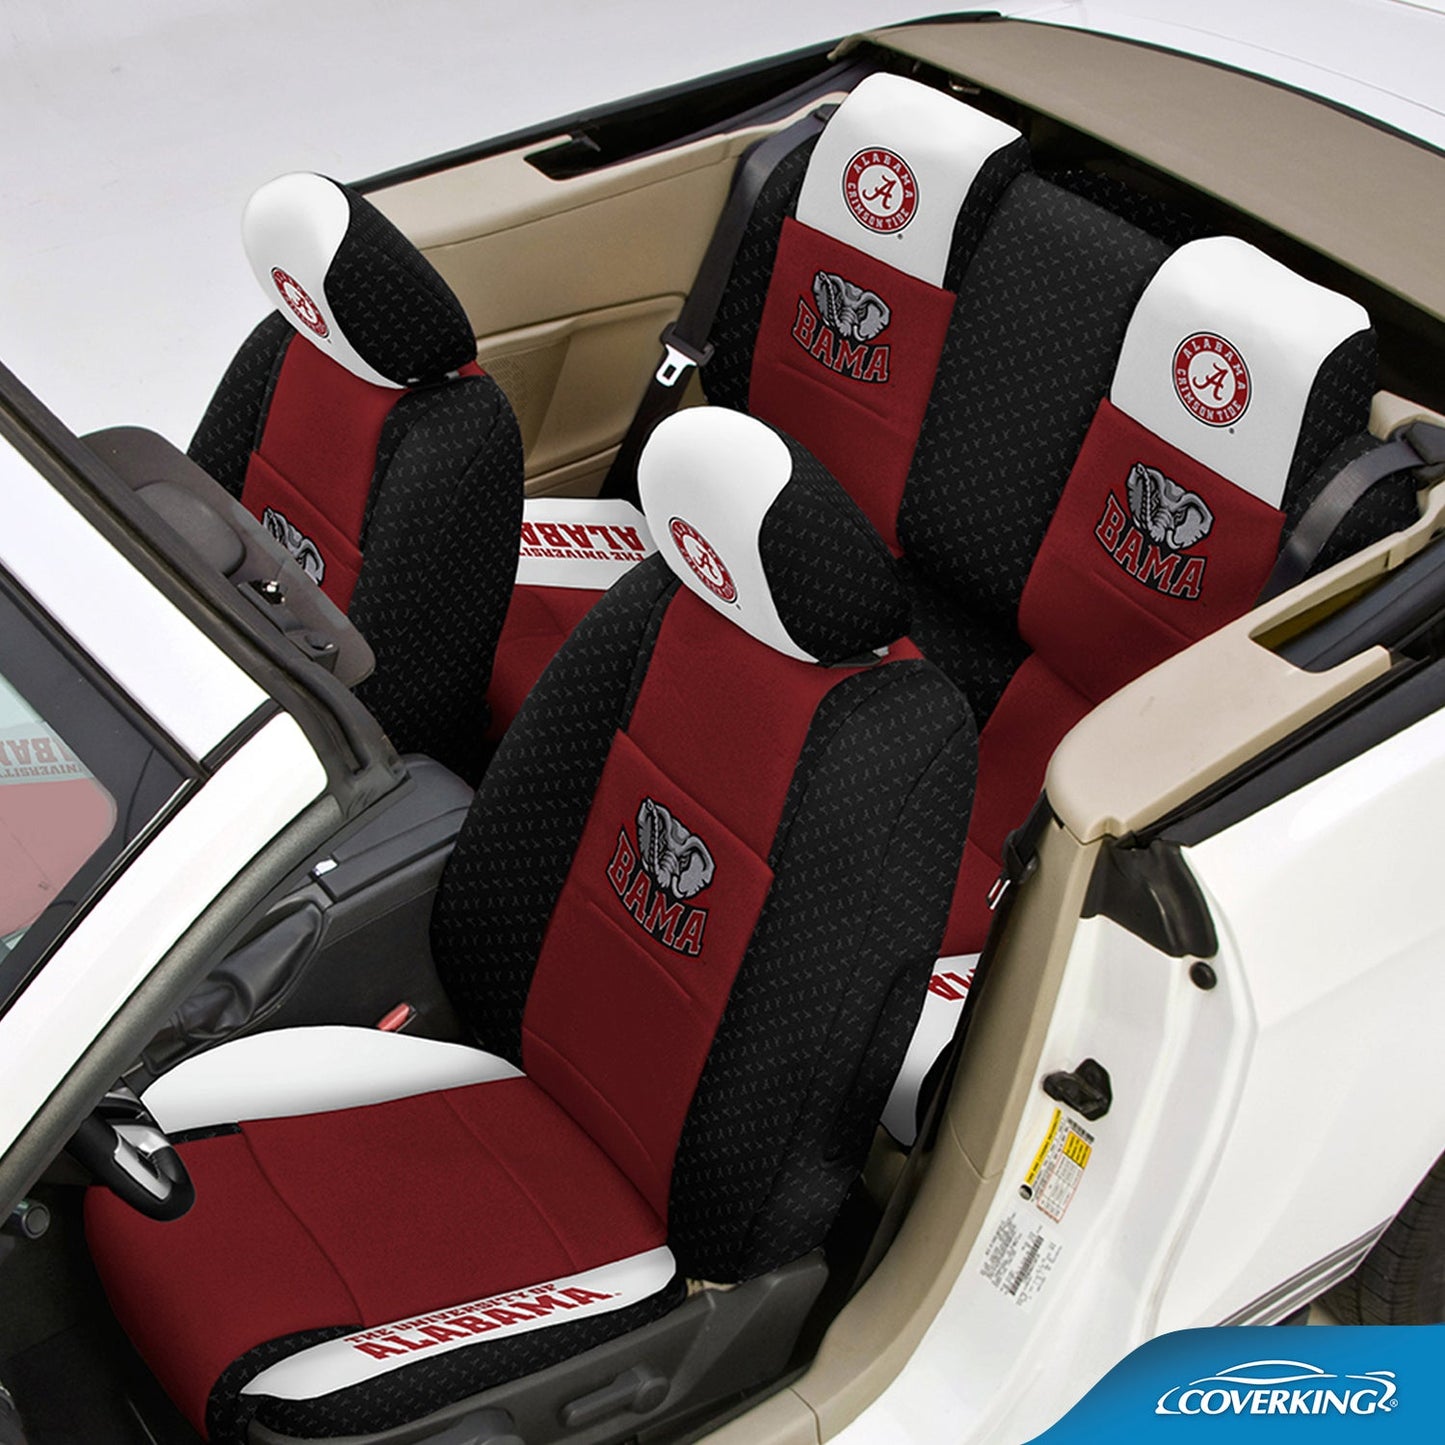 Coverking Collegiate Custom Seat Covers (Neosupreme) *NOT AVAILABLE* - Partsaccessoriesusa